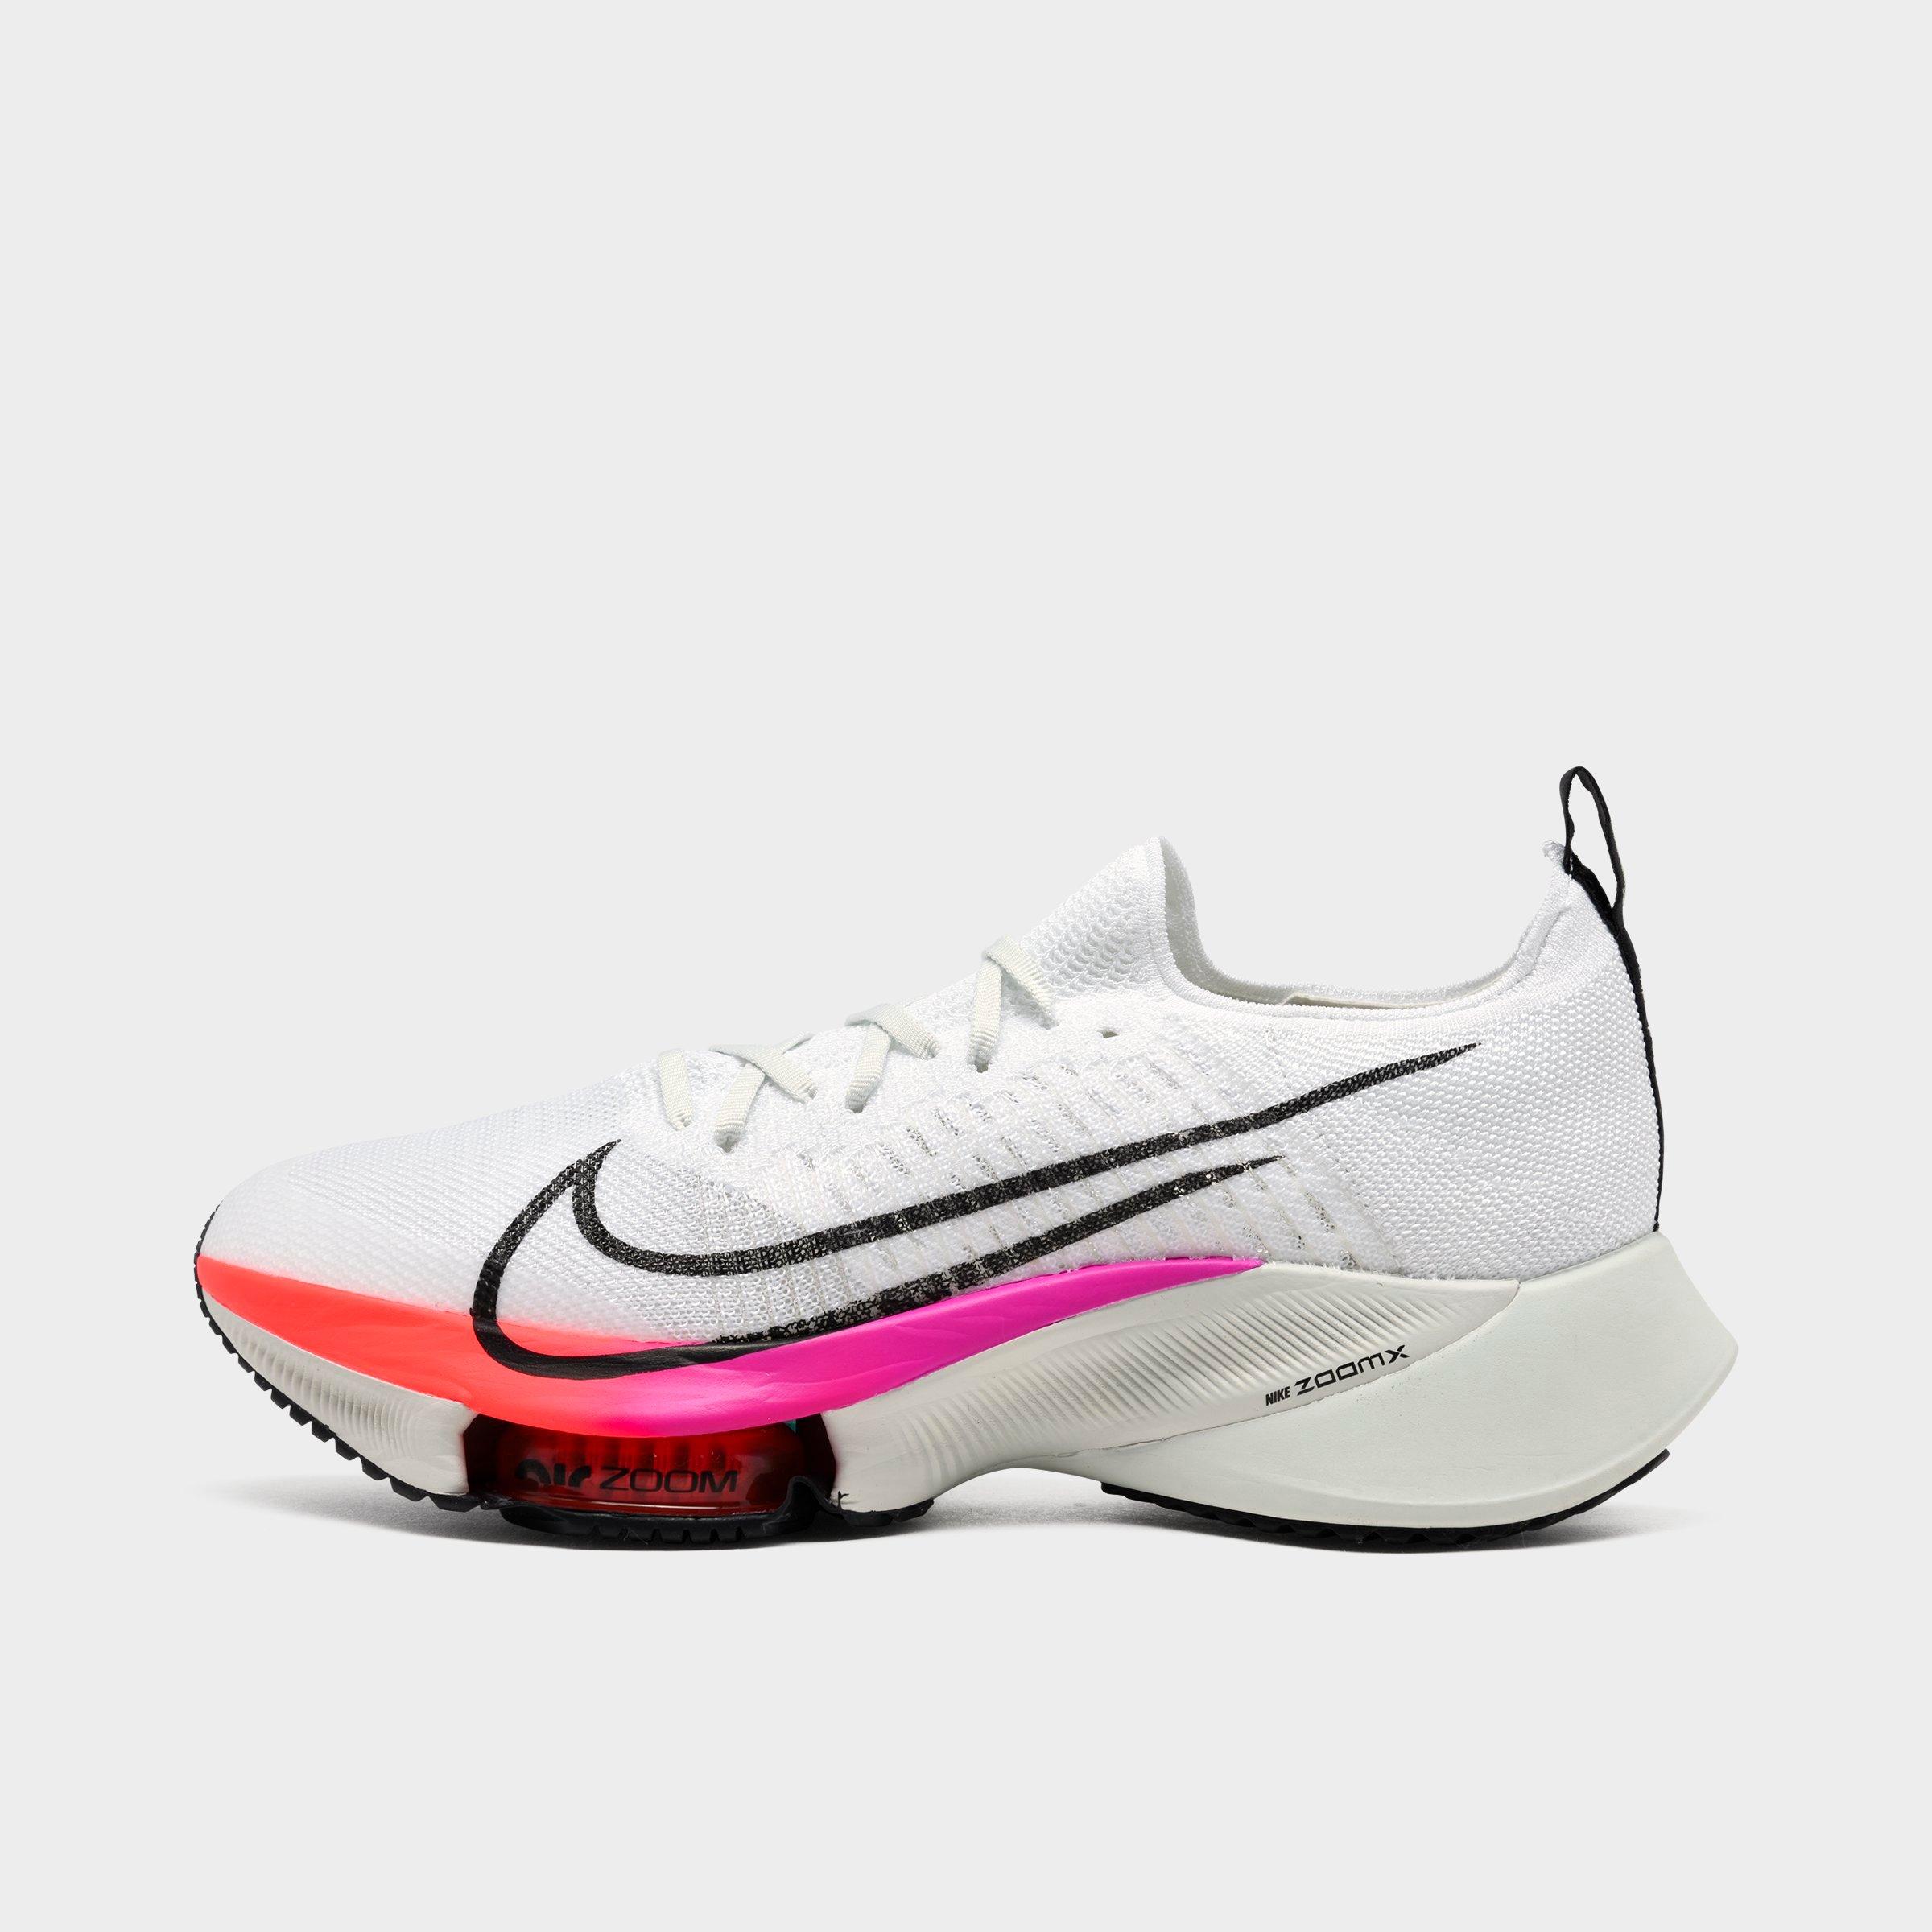 air zoom shoes price